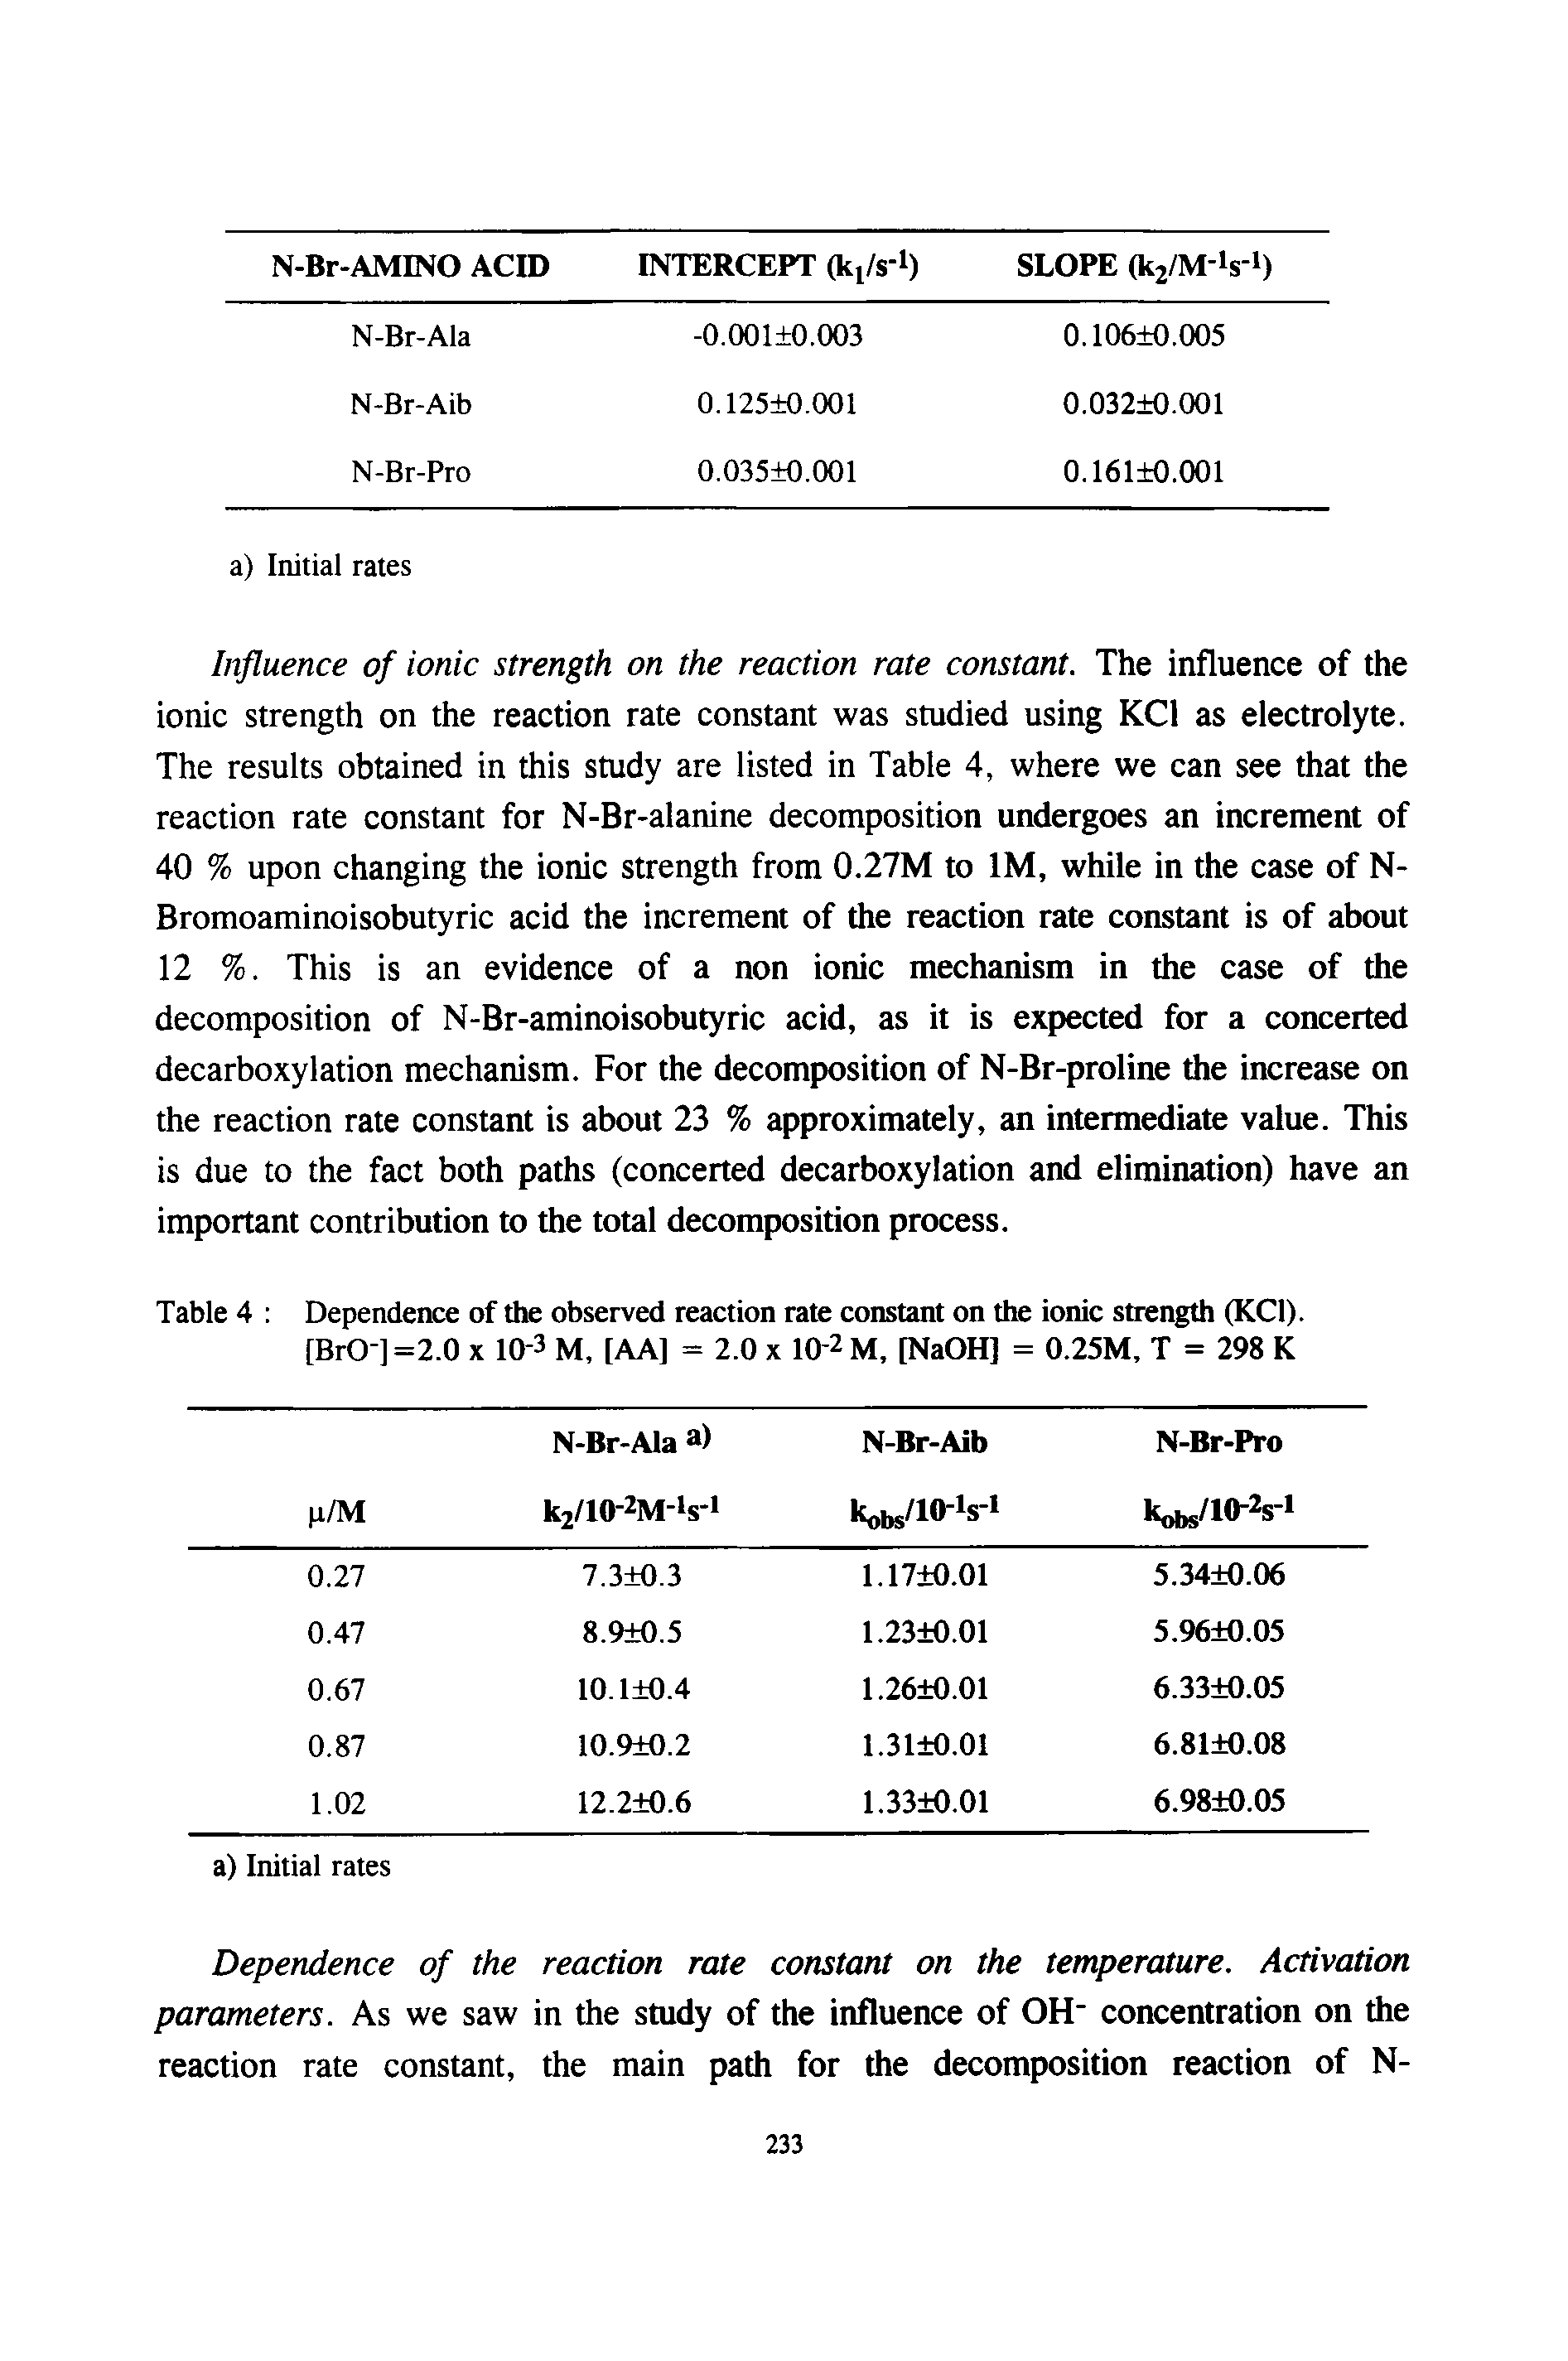 Table 4 Dependence of the observed reaction rate constant on the ionic strength (KCl).